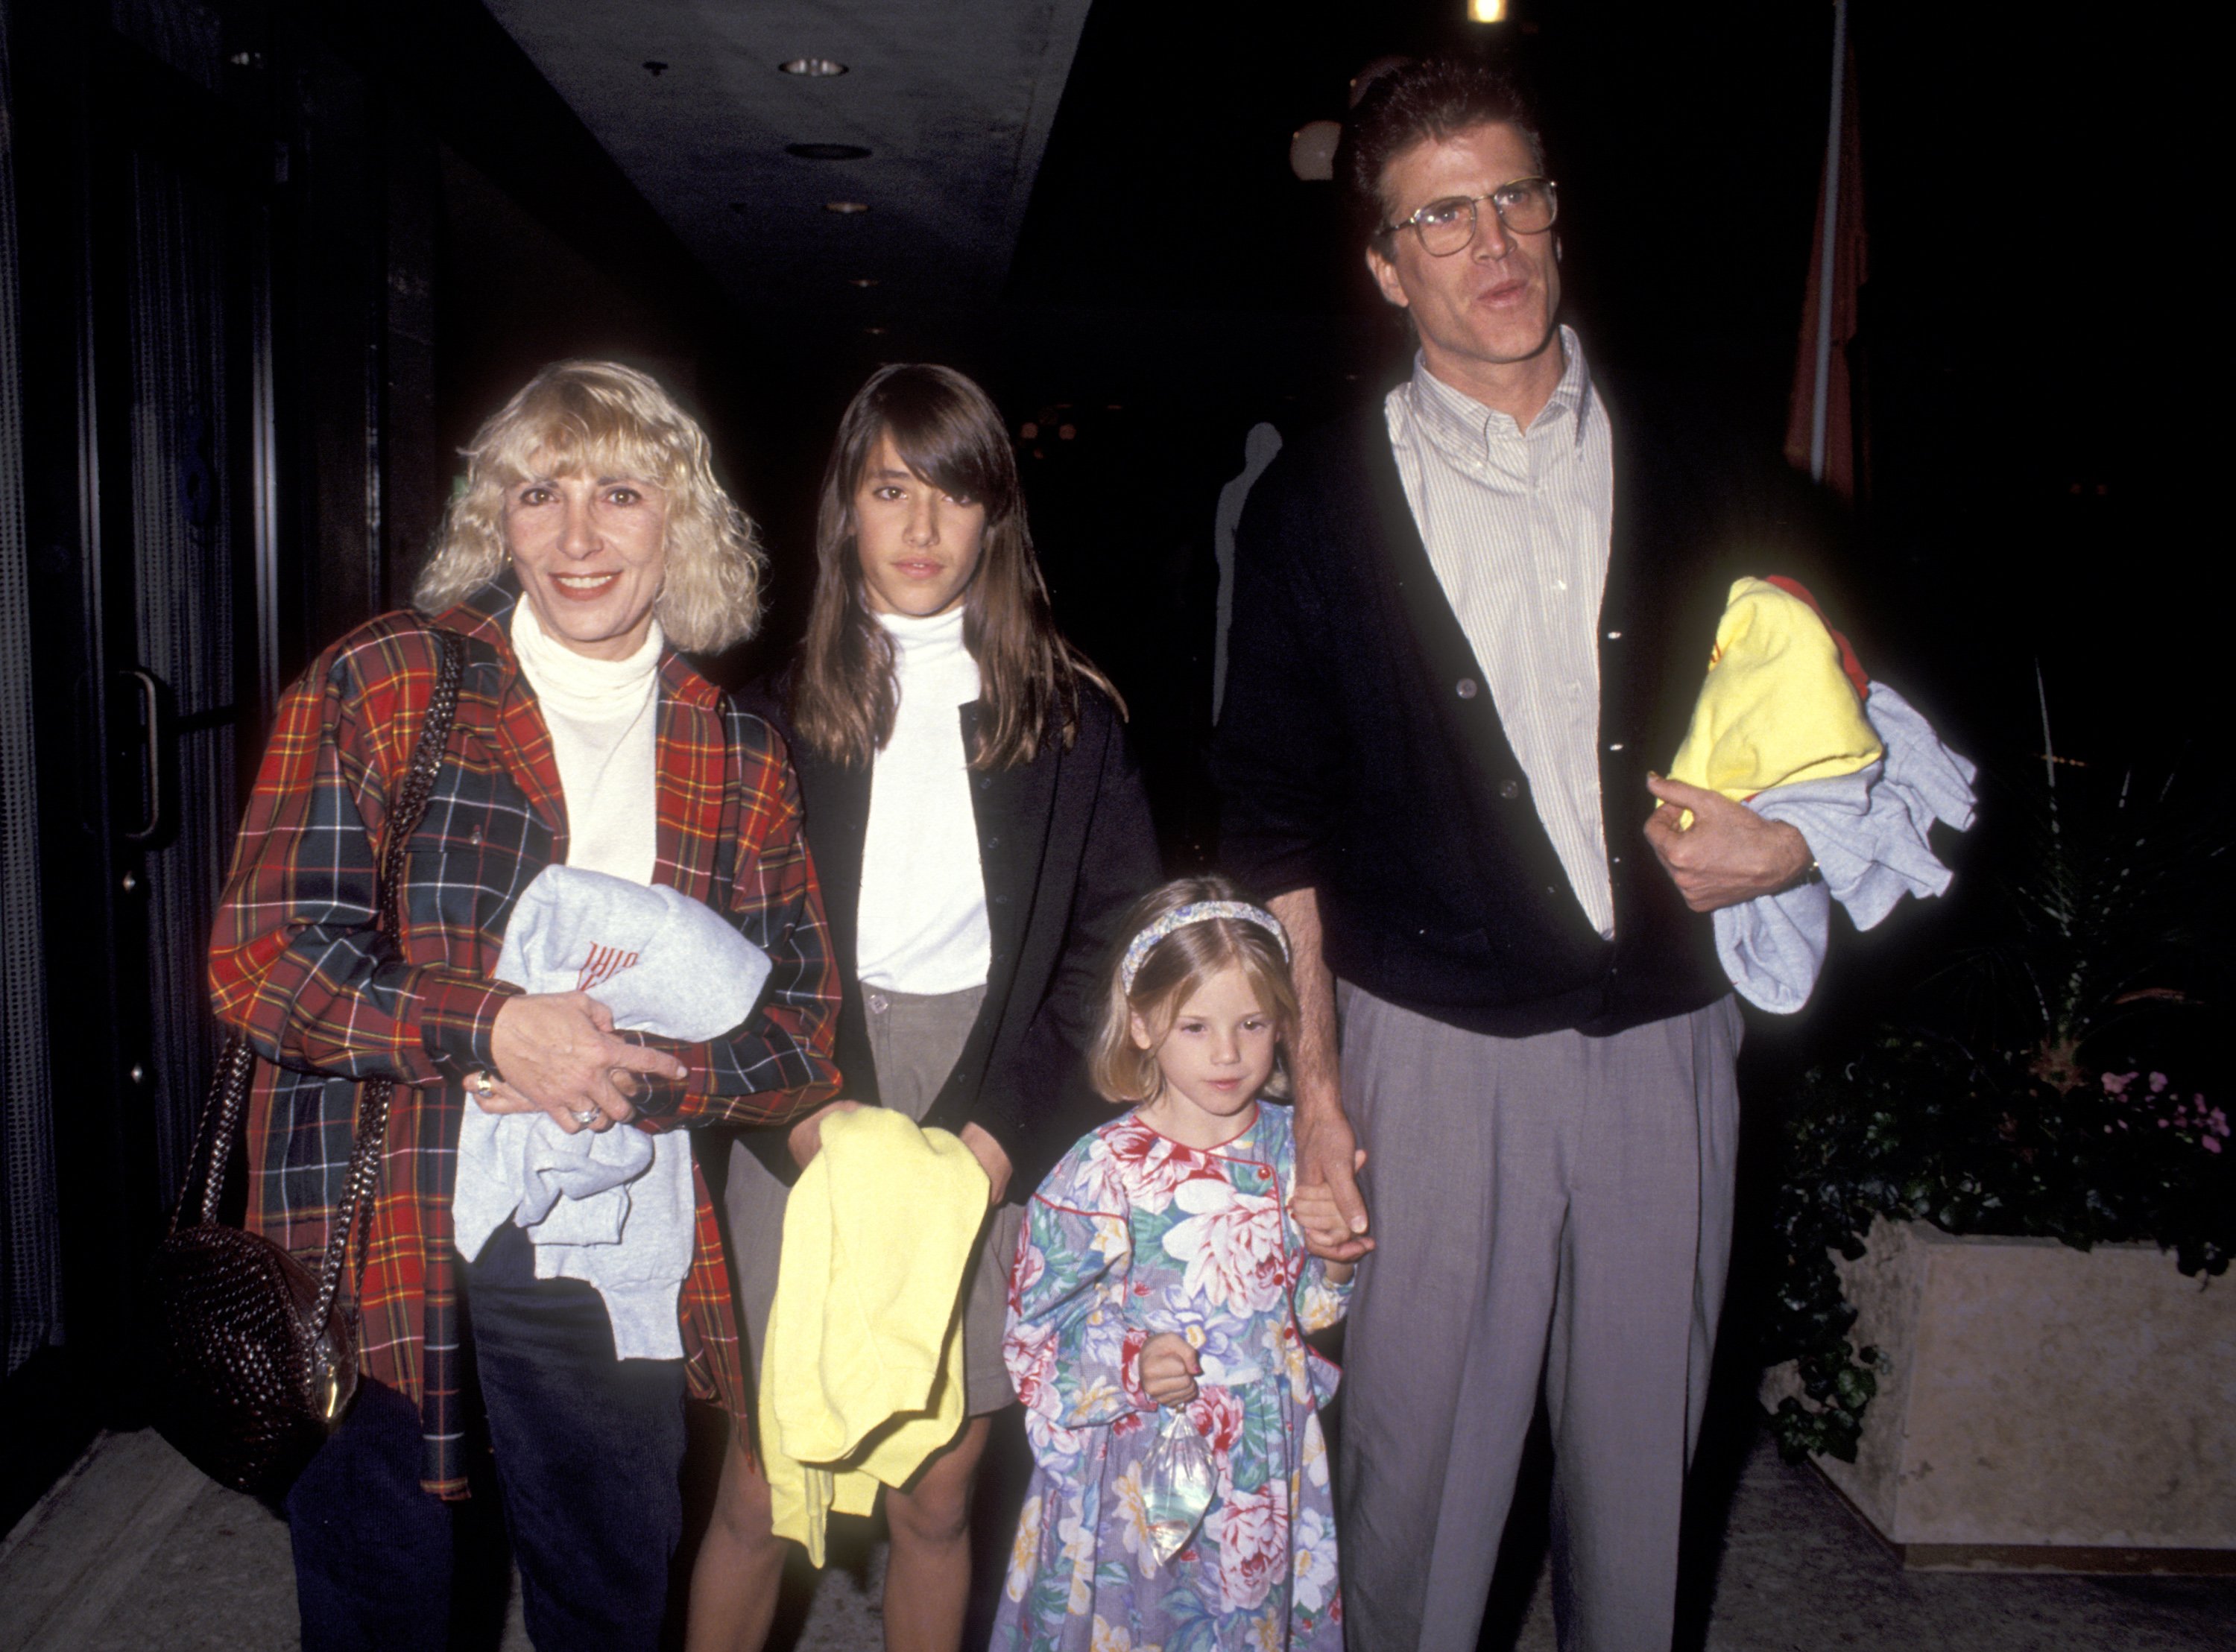 Casey Coates pictured with her kids Kate Danson, Alexis Danson and her husband Ted Danson at the Los Angeles premiere of "My Girl." / Source: Getty Images